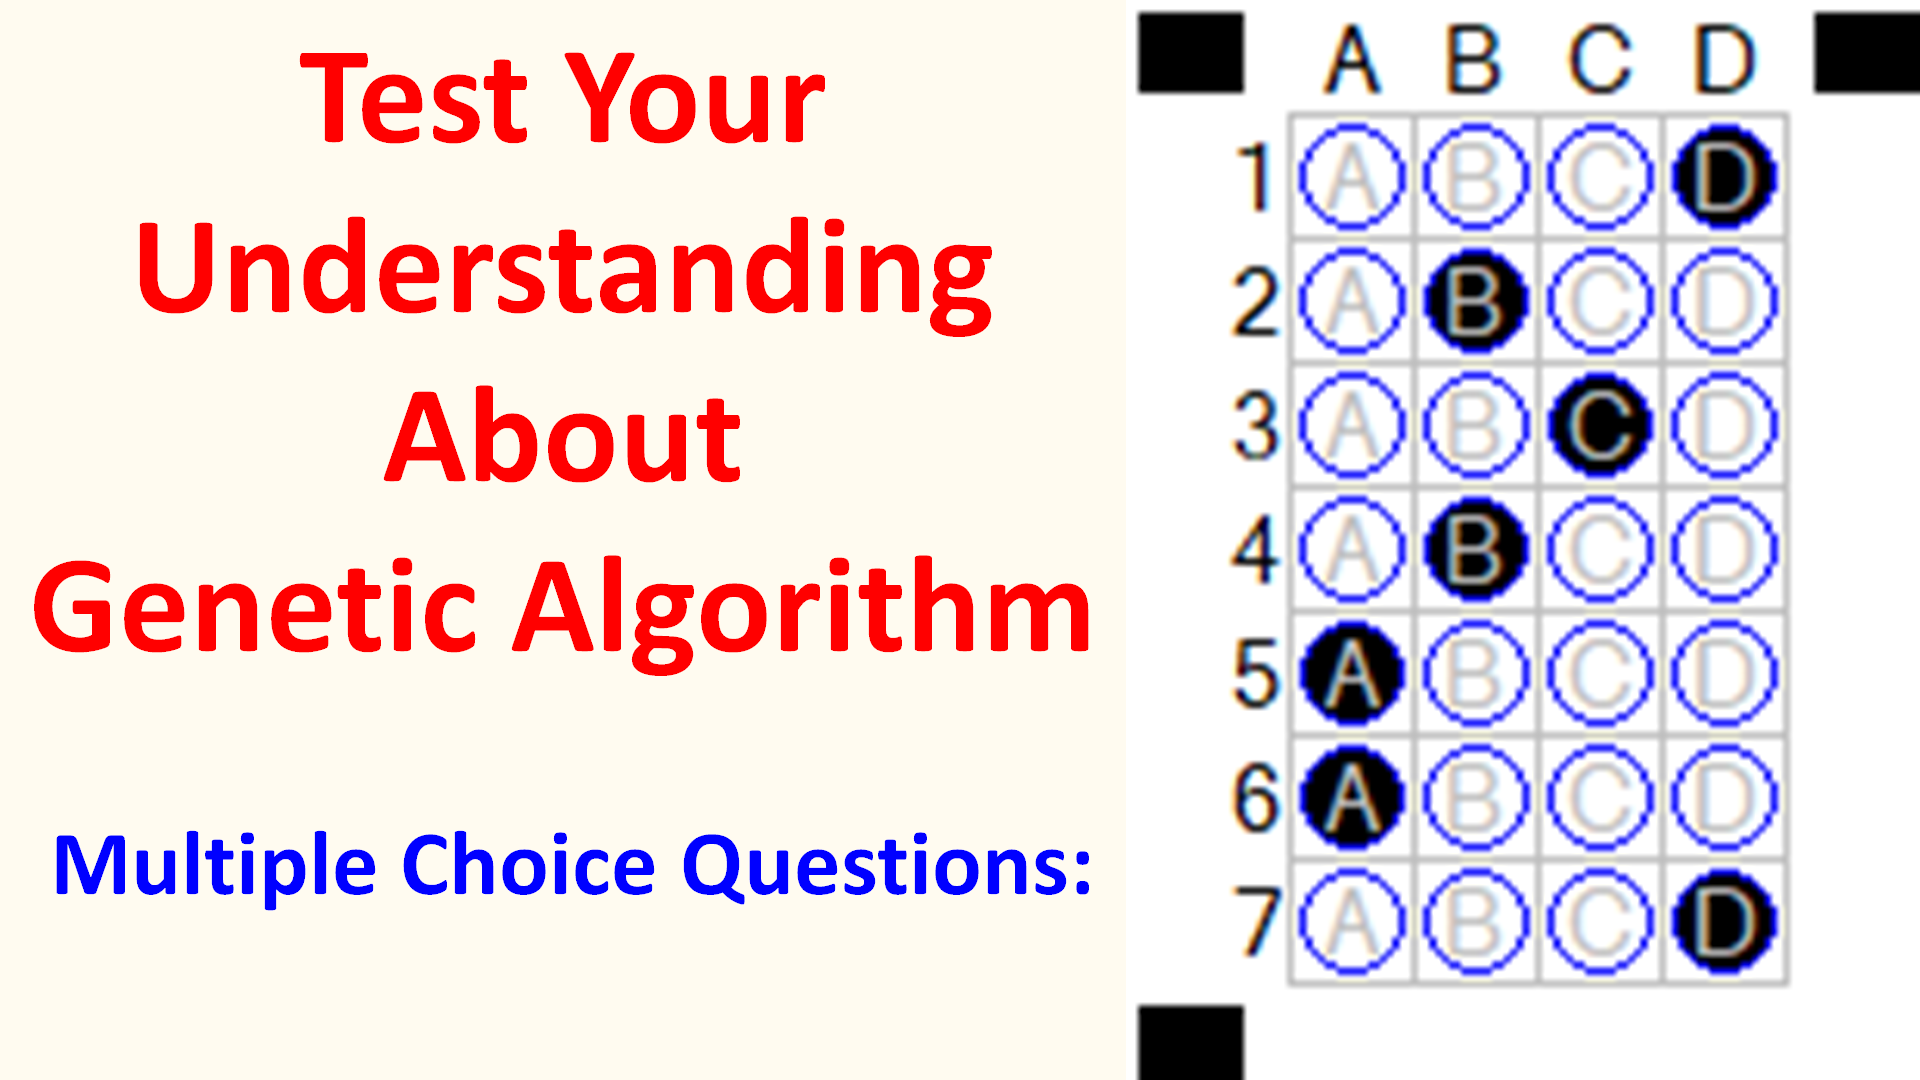 Test Your Understanding About Genetic Algorithm